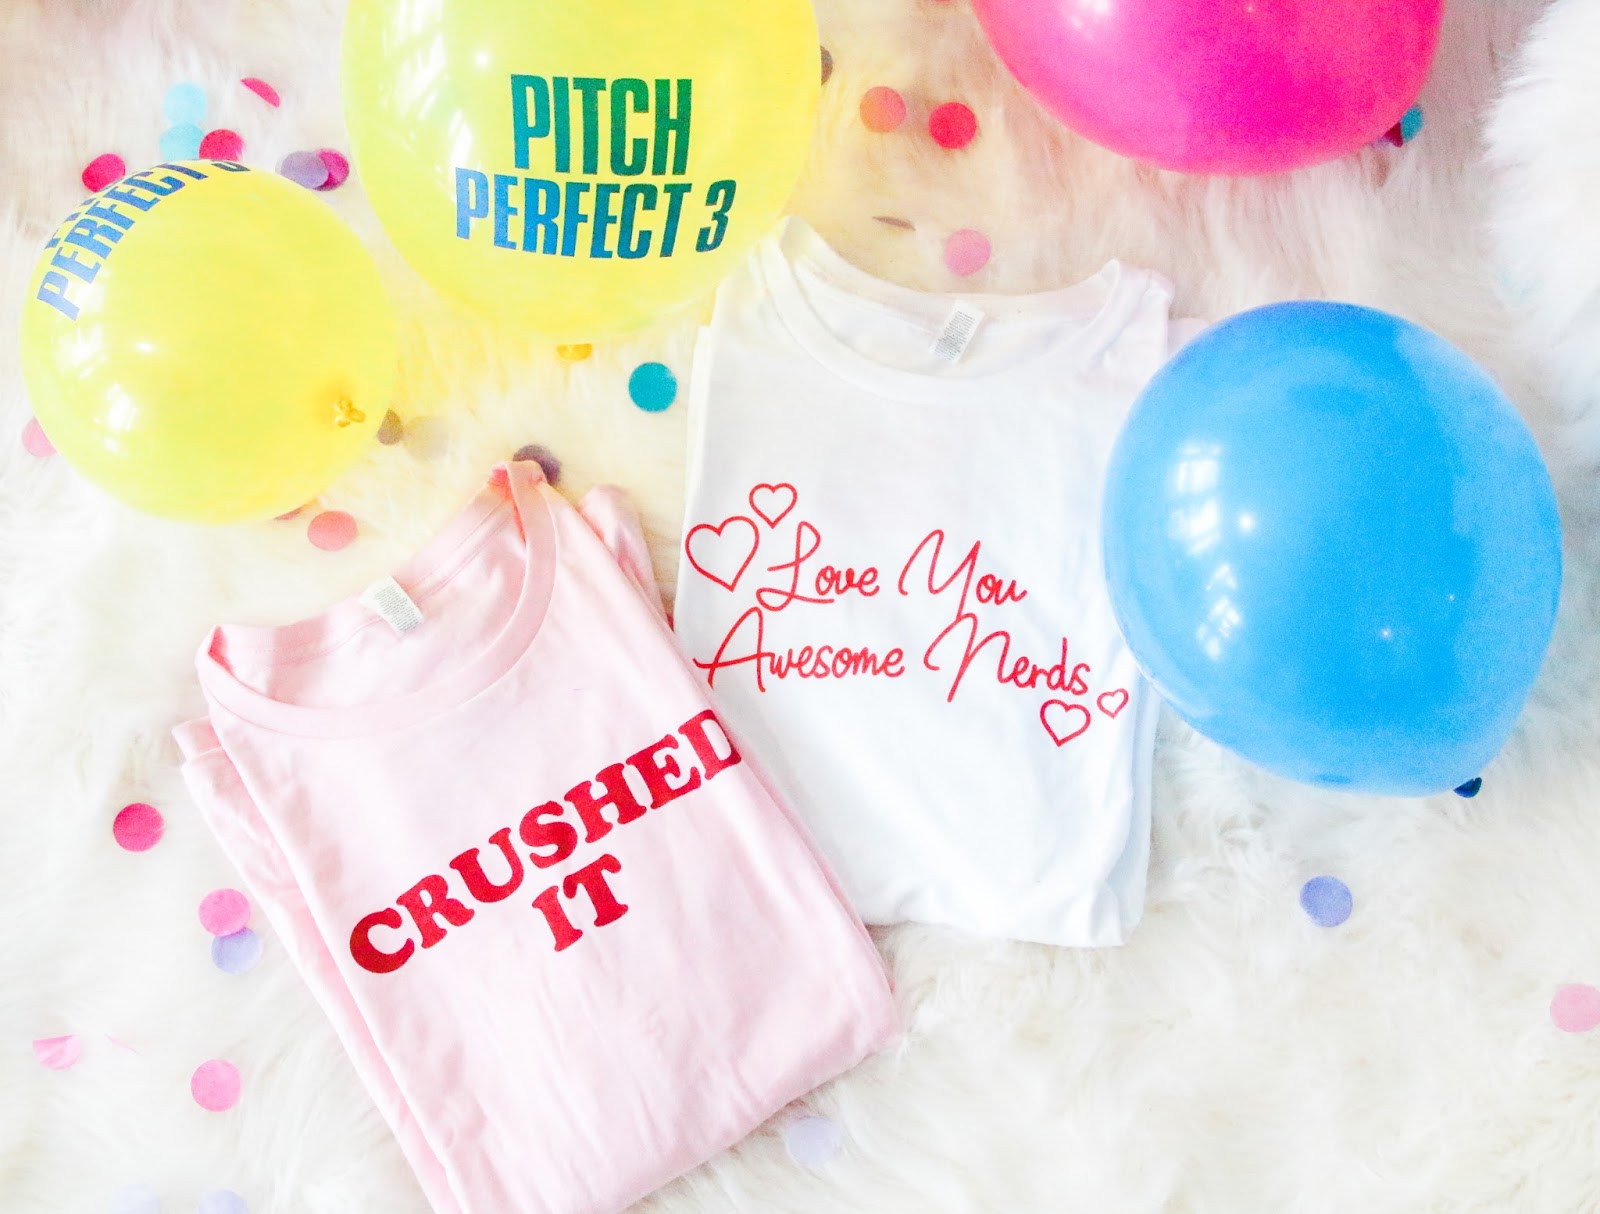 Pitch Perfect 3 Movie Party by popular party blogger Celebration Stylist